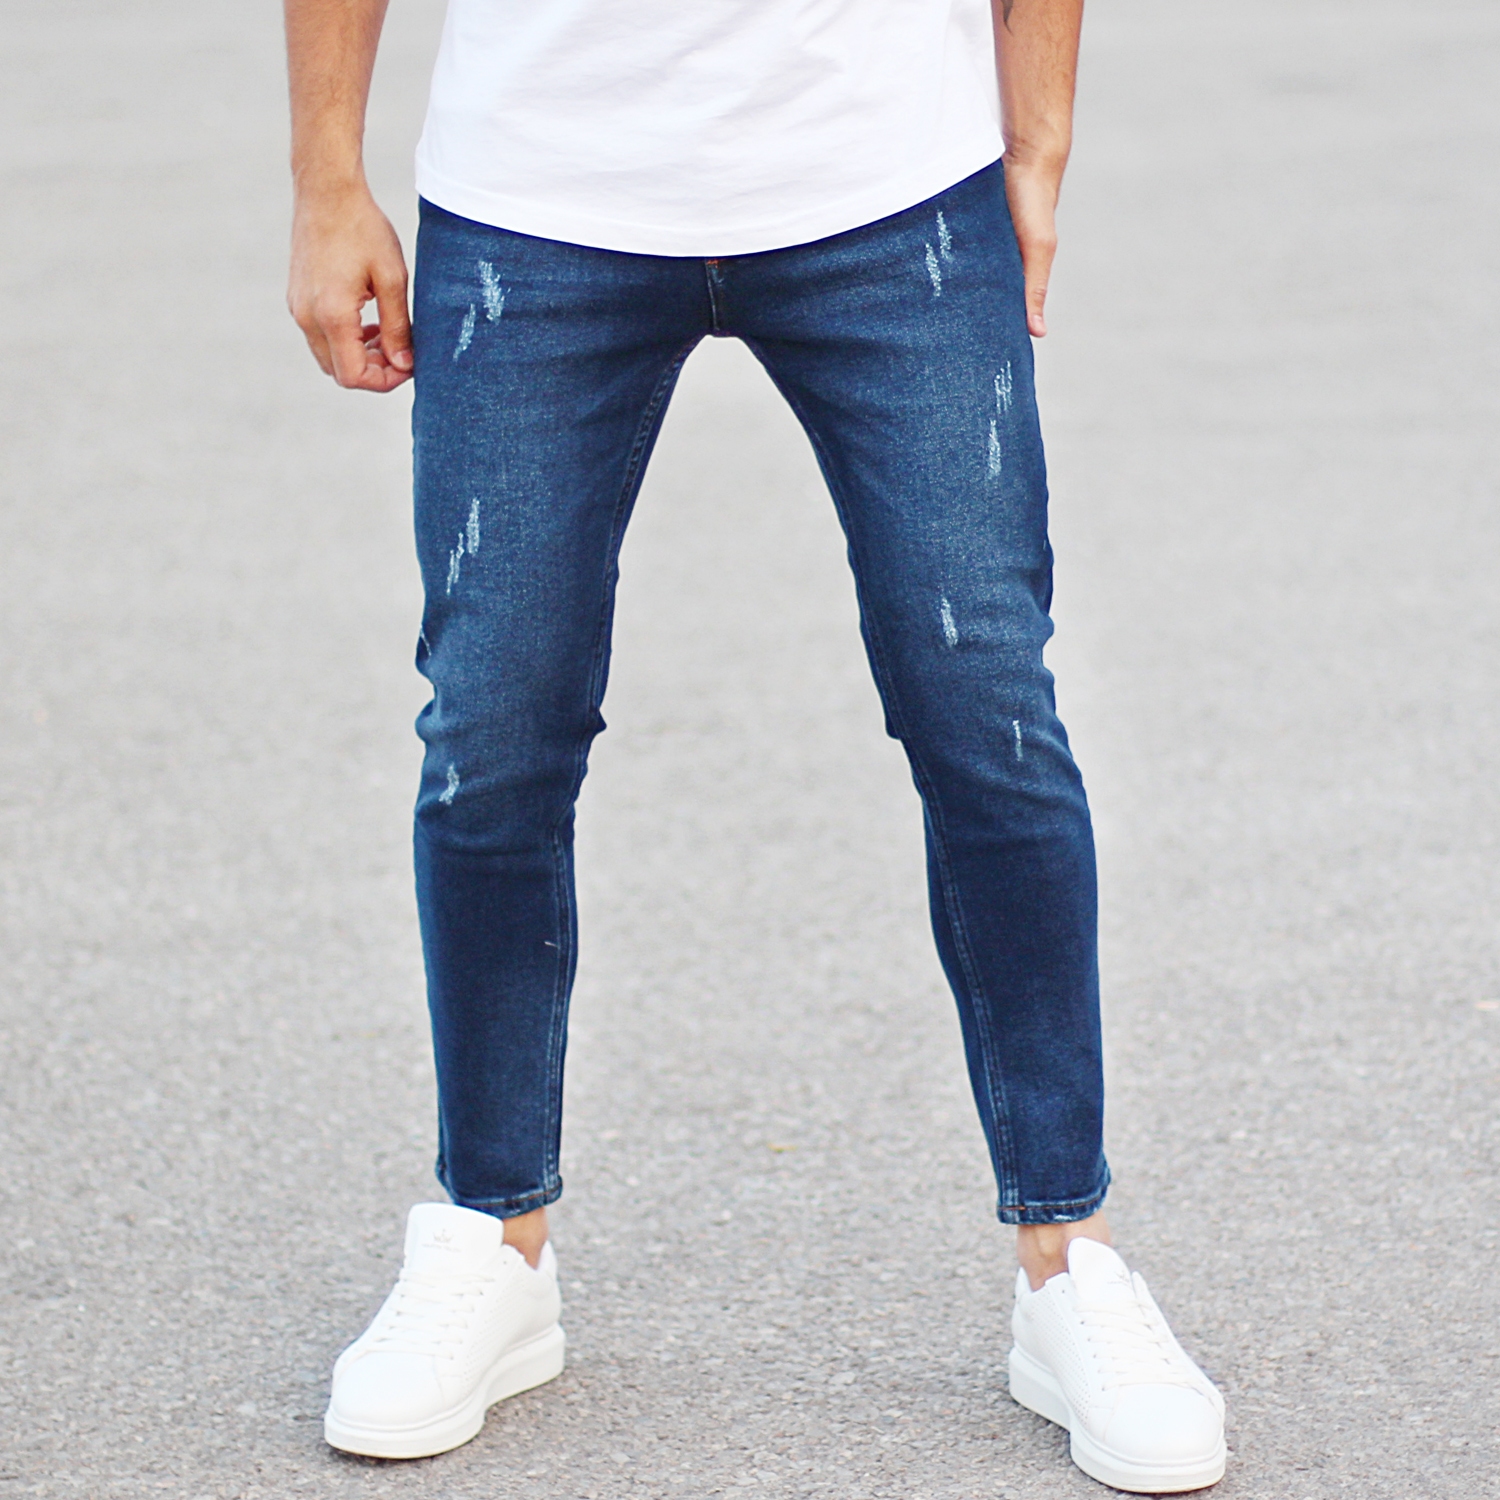 Men's Fashion Jeans With Rips Dark Blue